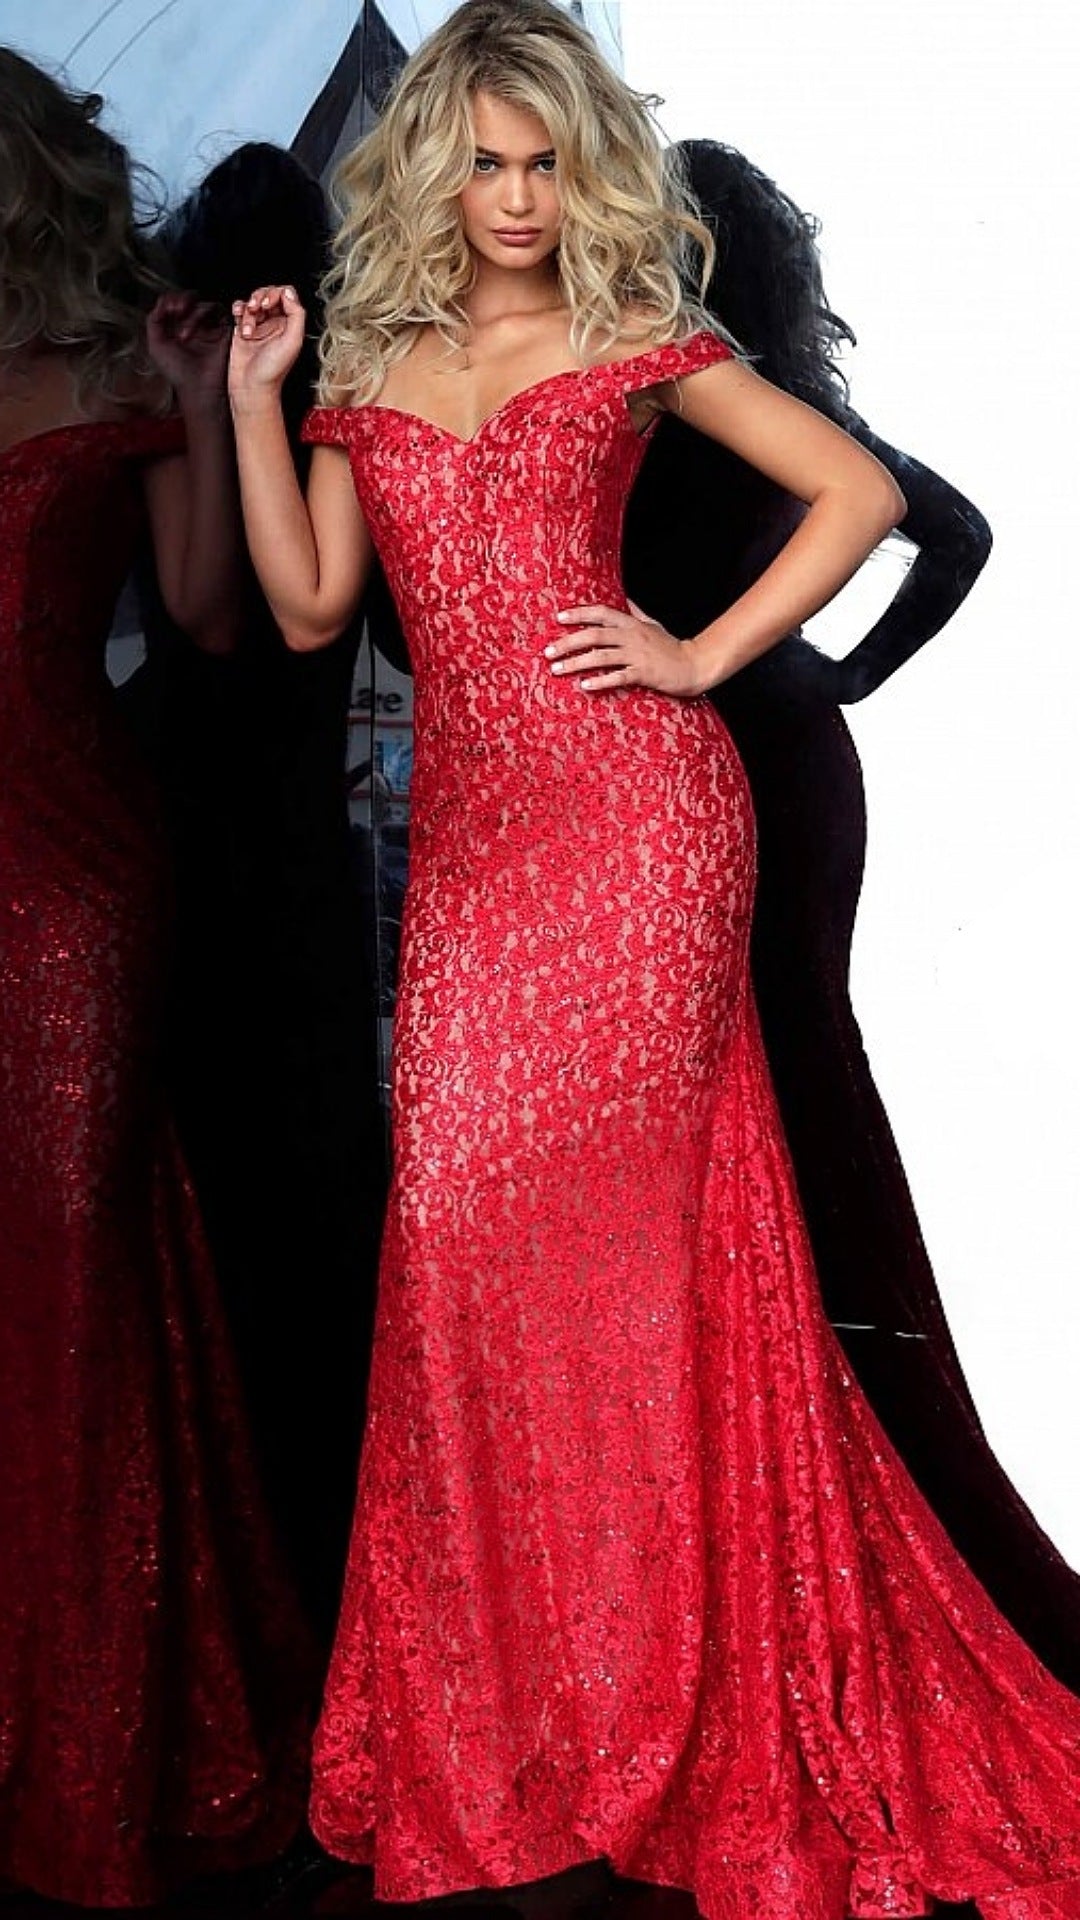 Casie Red Laced Flowing Trail Of The Shoulder Formal Prom Dress